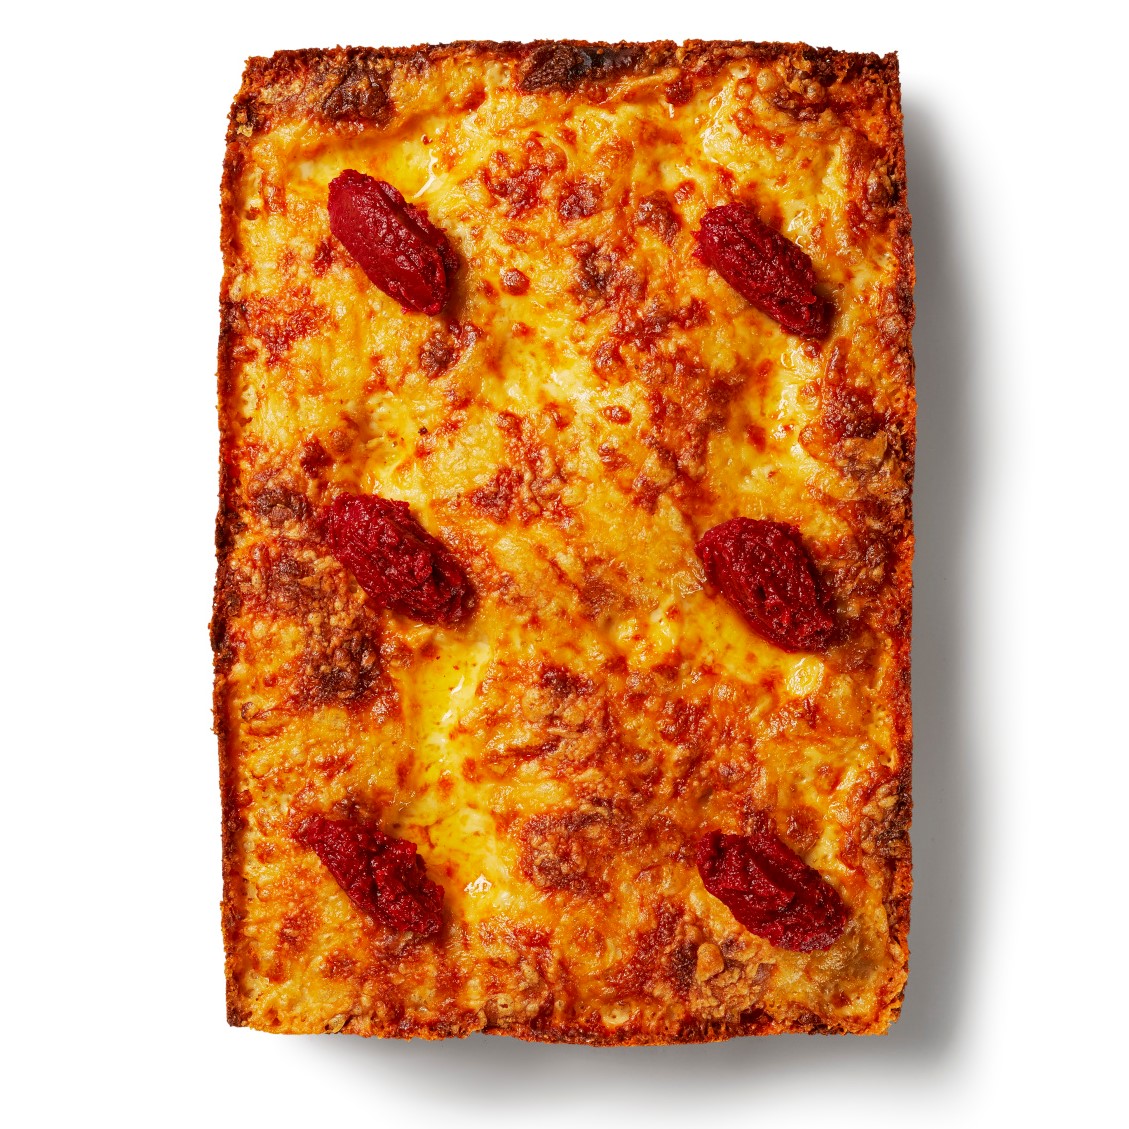 File:Detroit Style Pizza from Calphalon Bread Pans.png - Wikipedia